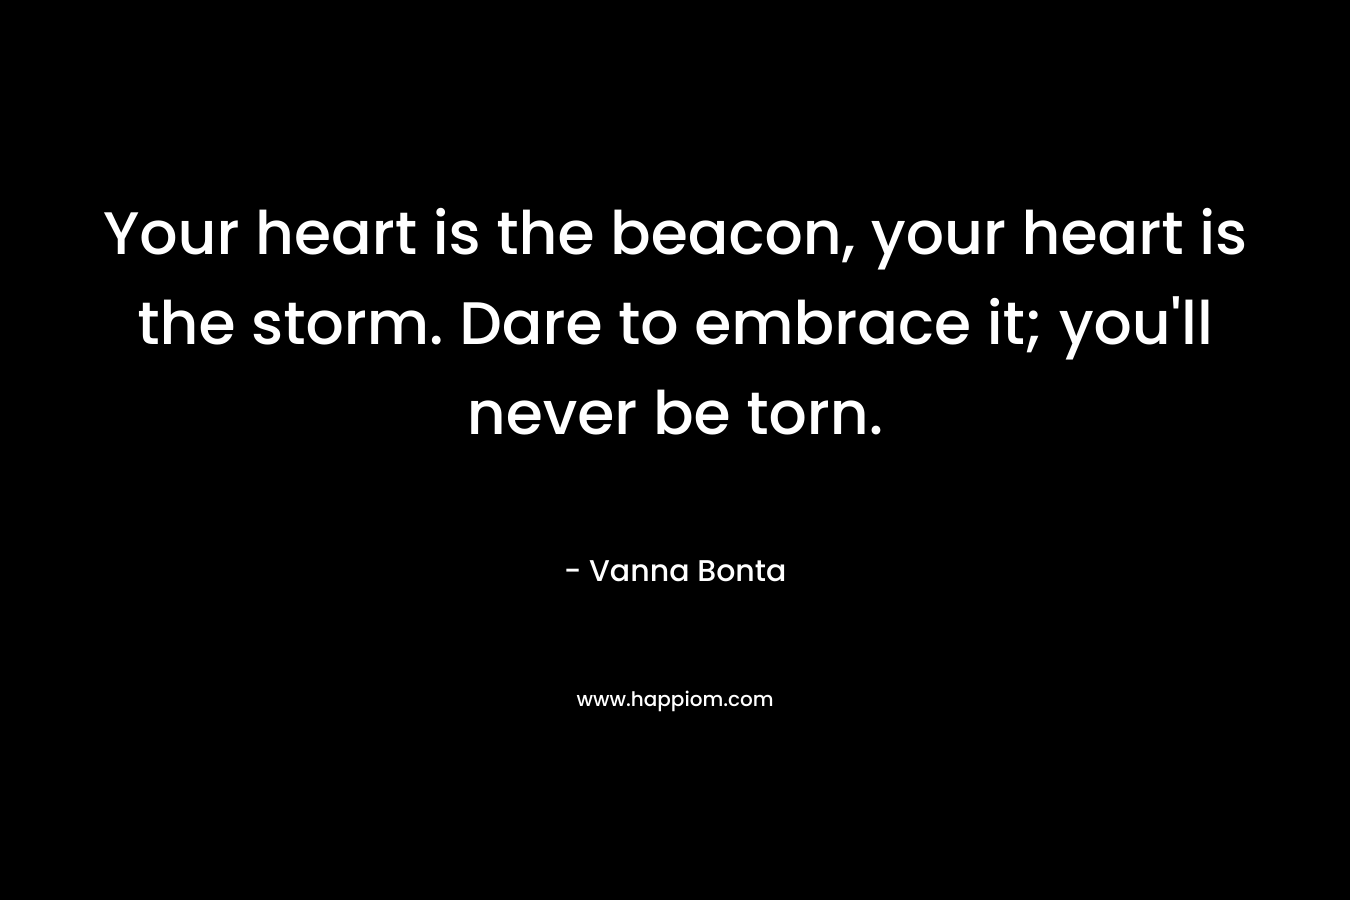 Your heart is the beacon, your heart is the storm. Dare to embrace it; you'll never be torn.